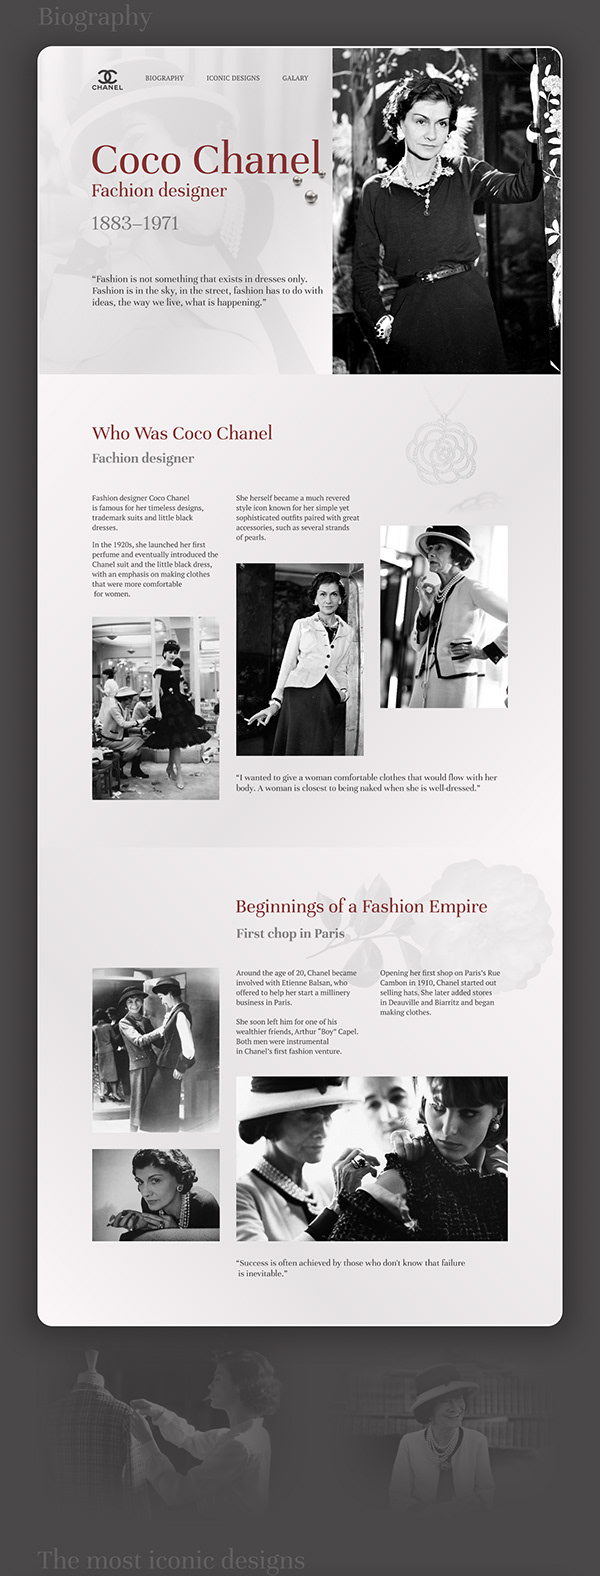 Coco Chanel Images  Photos, videos, logos, illustrations and branding on  Behance